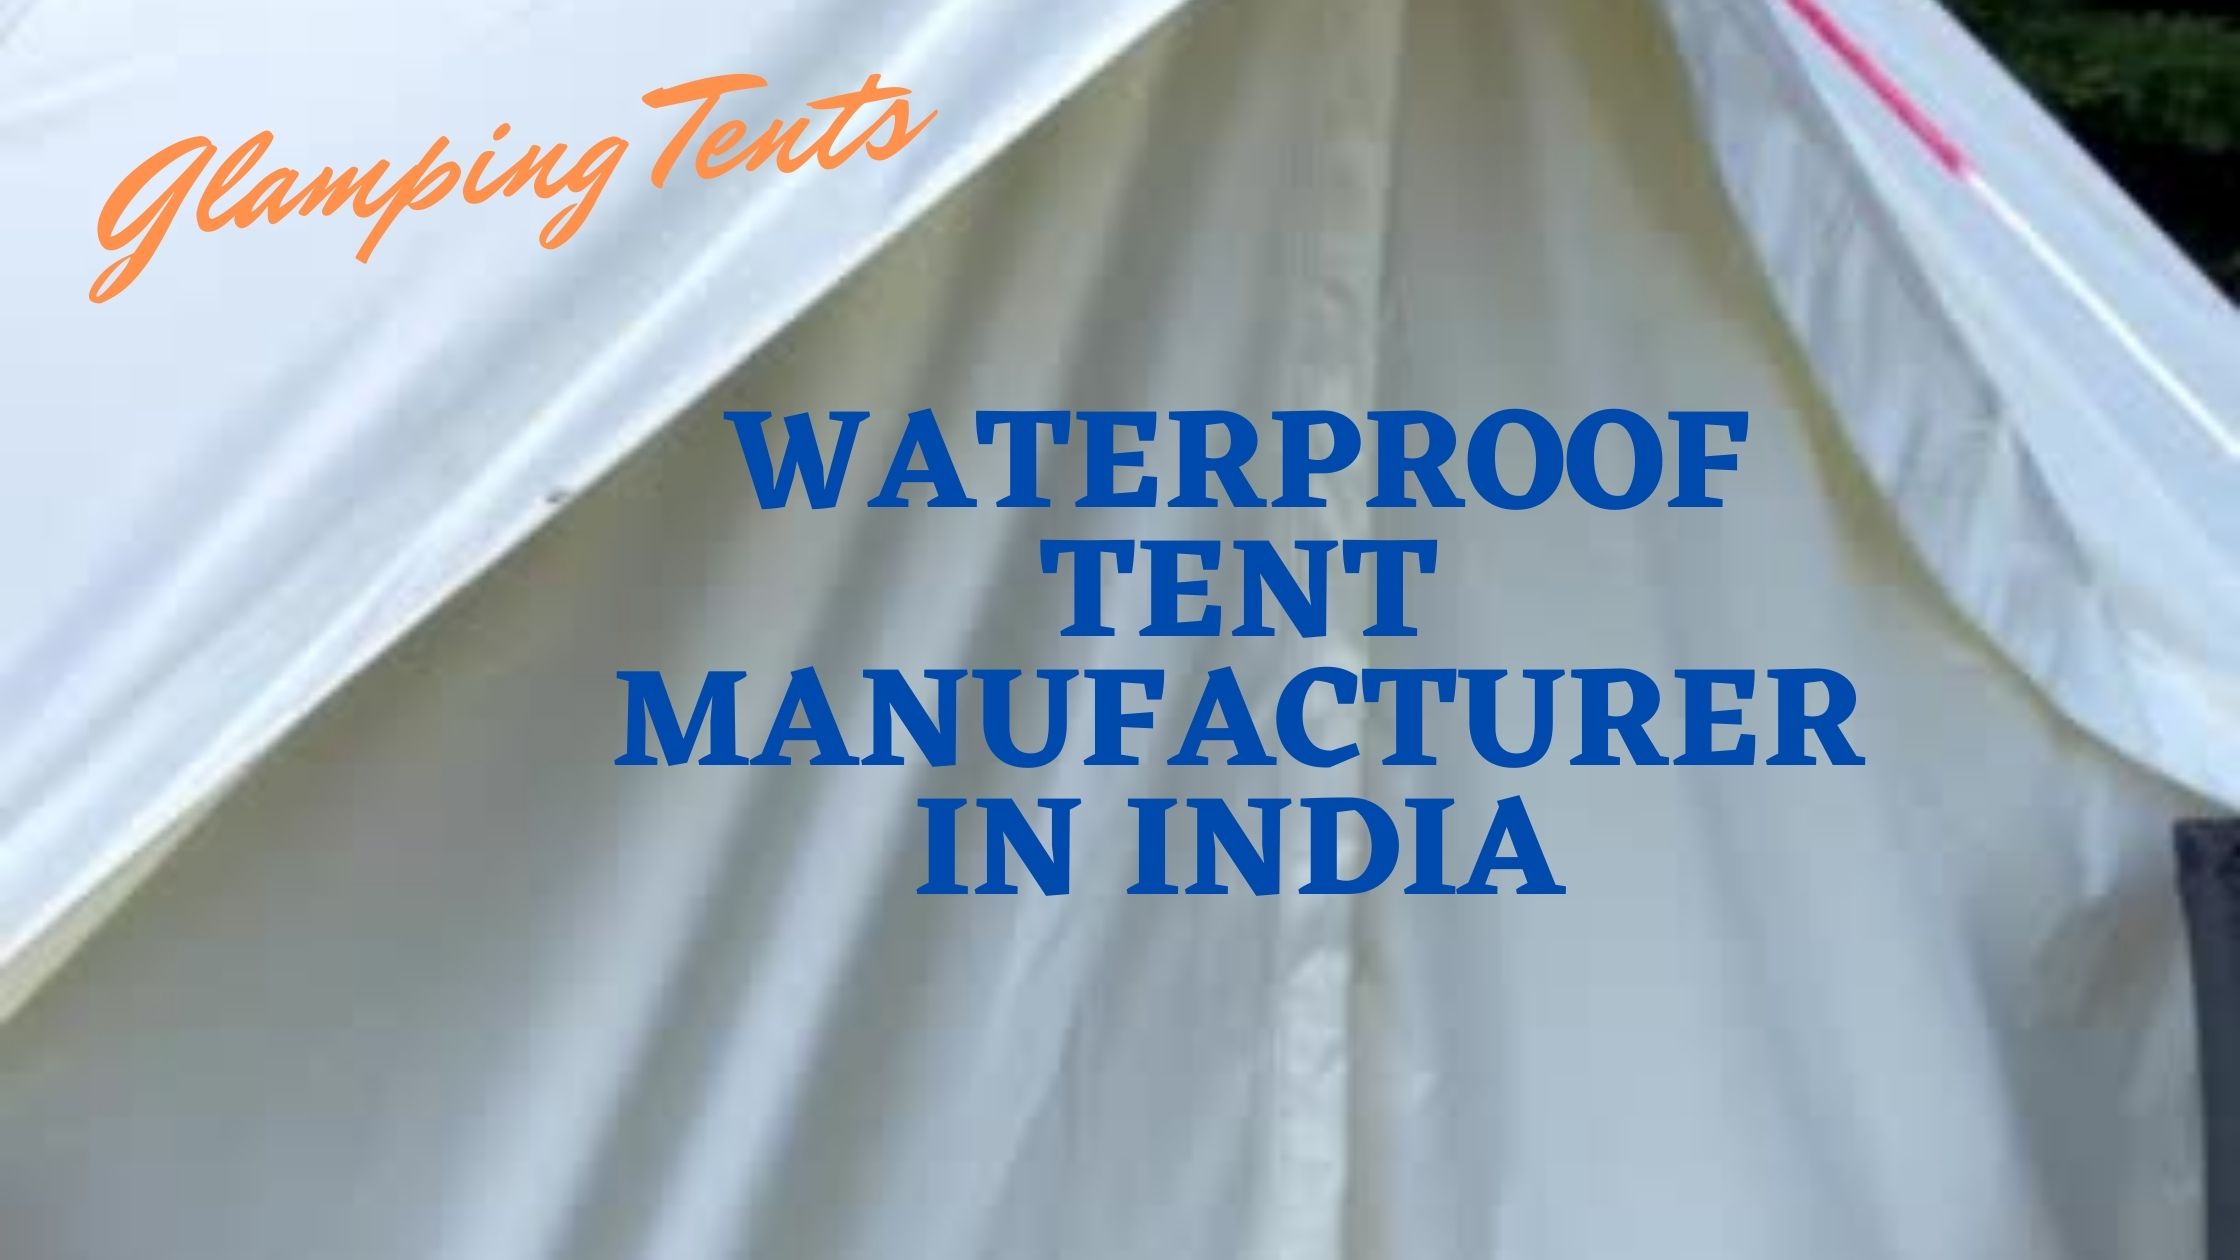 How To Choose A Waterproof Tent For A Resort Or Camping?